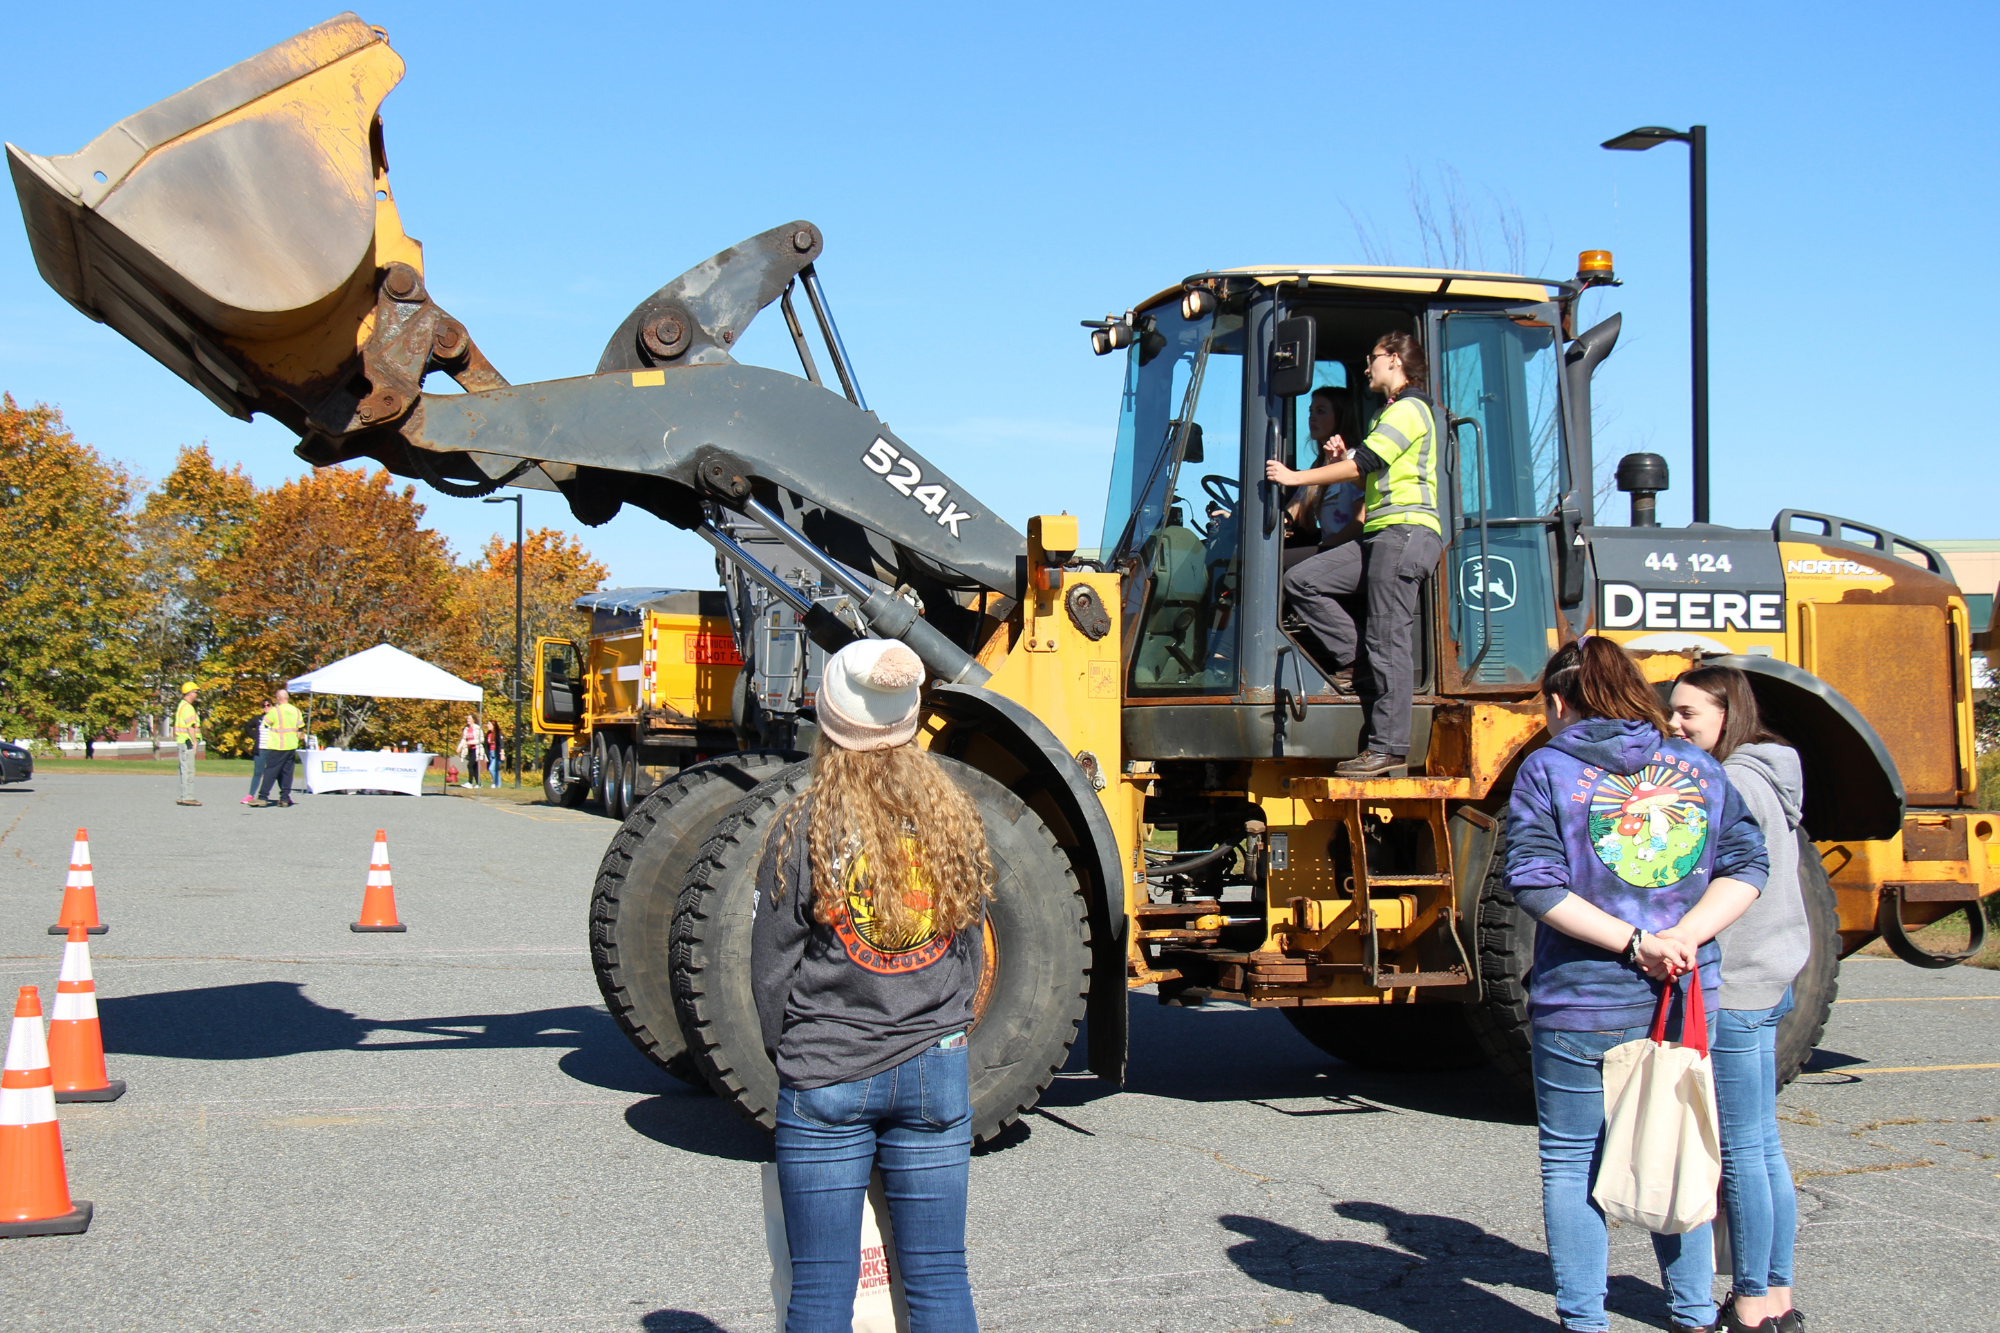 High school students look on as another student learns to operate a backhoe.